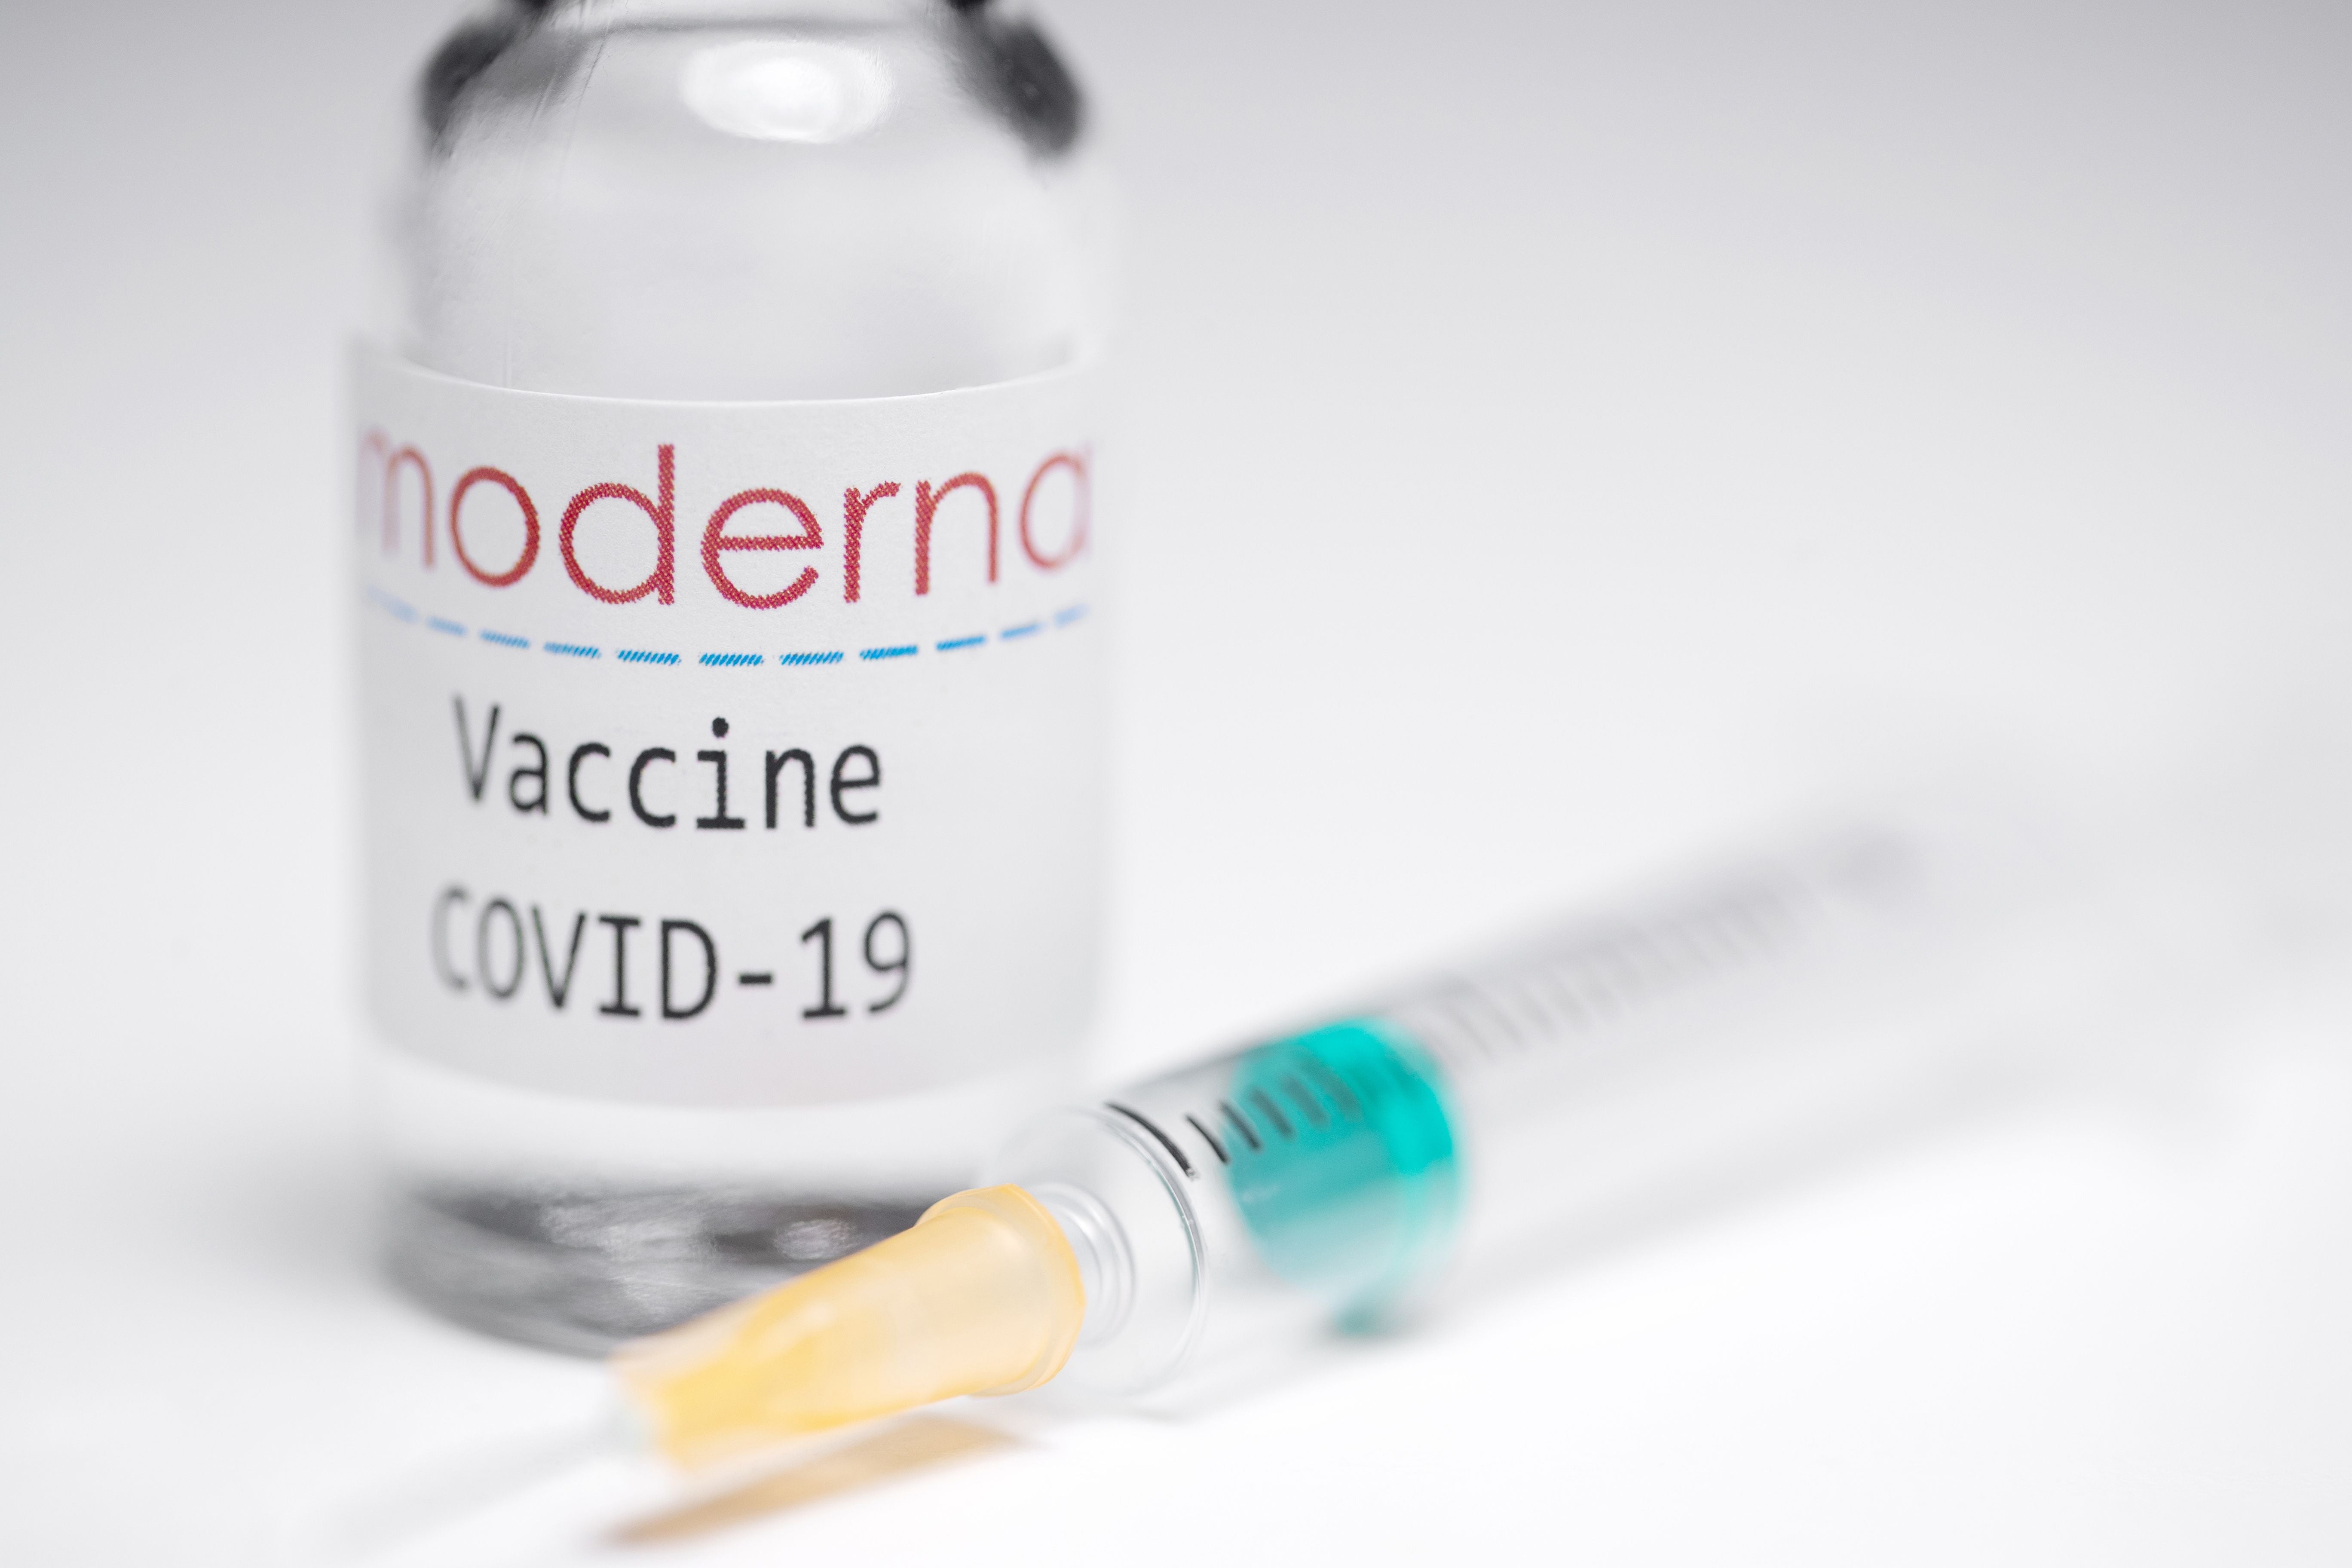 The Moderna vaccine can be stored at fridge temperature